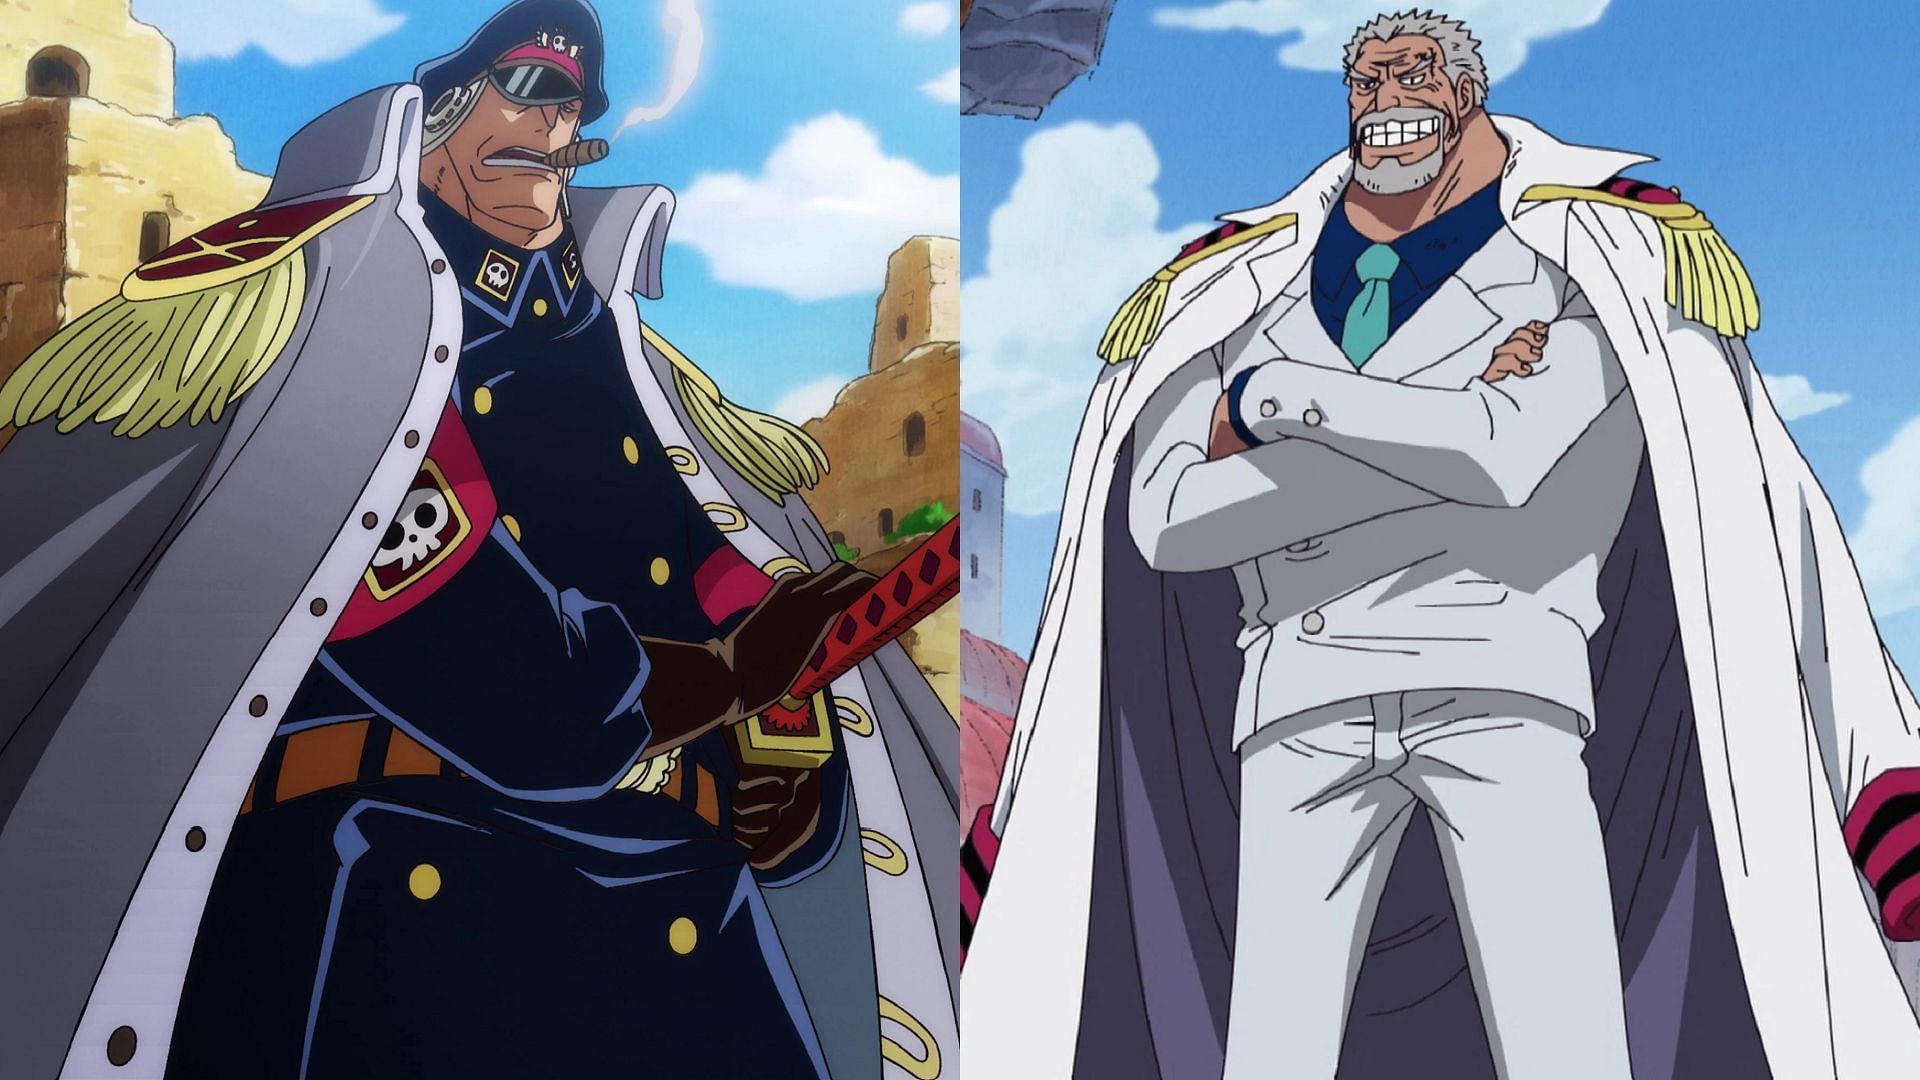 Shiryu exploited a unethical strategy to land an easy blow on Garp (Image via Toei Animation, One Piece)